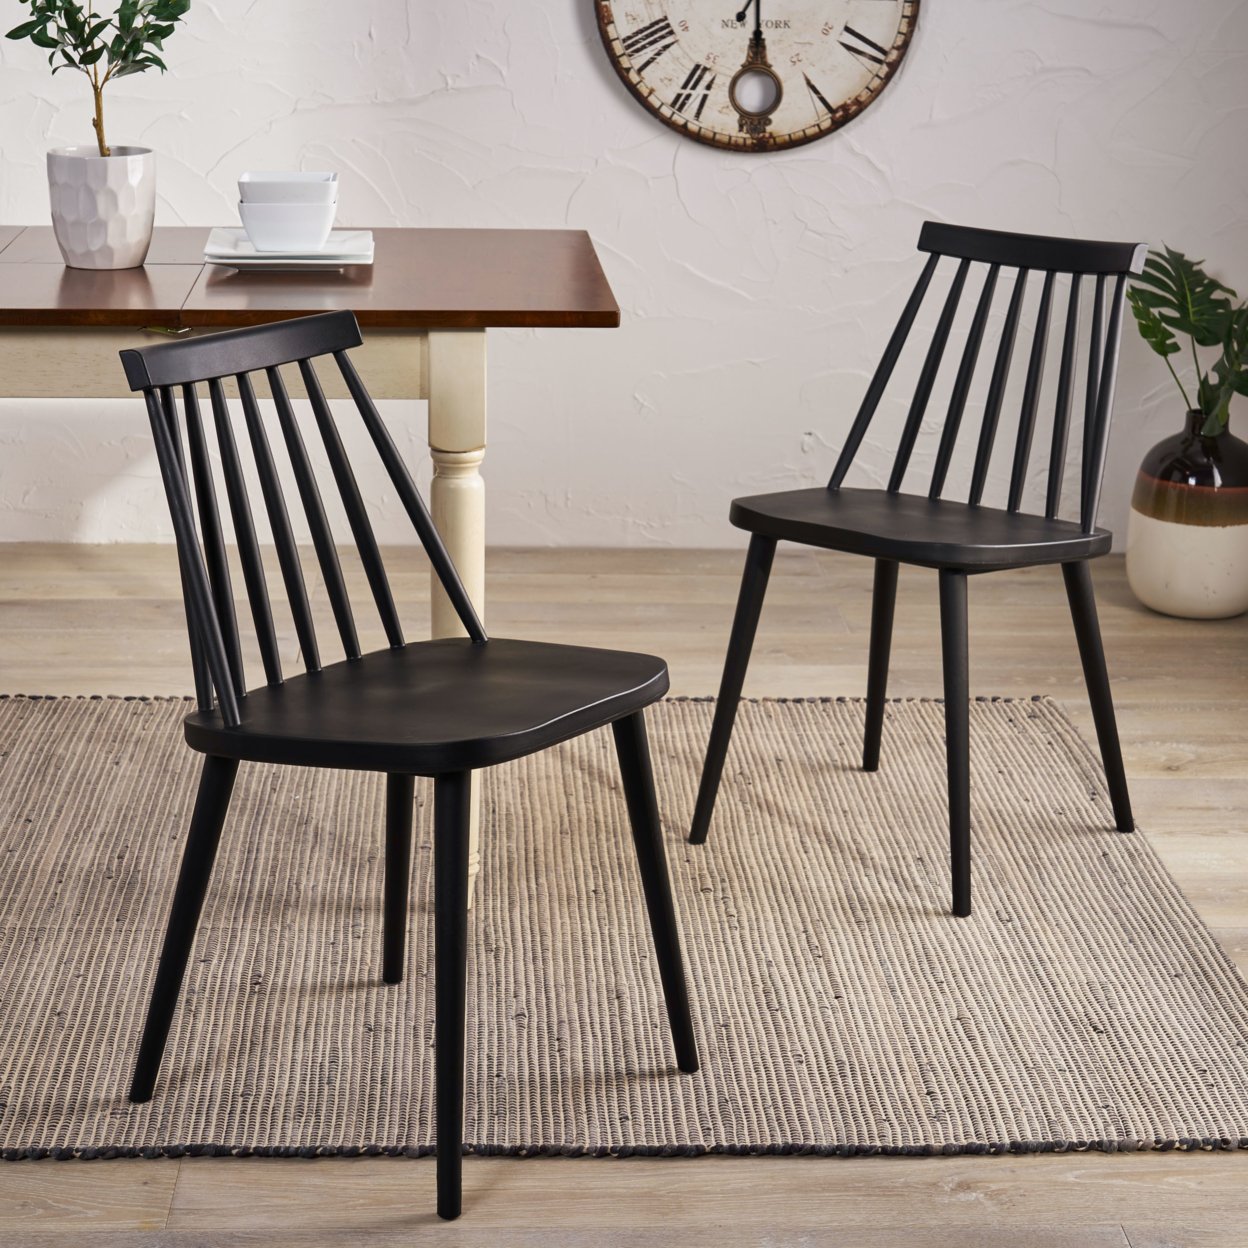 Phoebe Hume Farmhouse Spindle-Back Dining Chair (Set Of 2) - Black